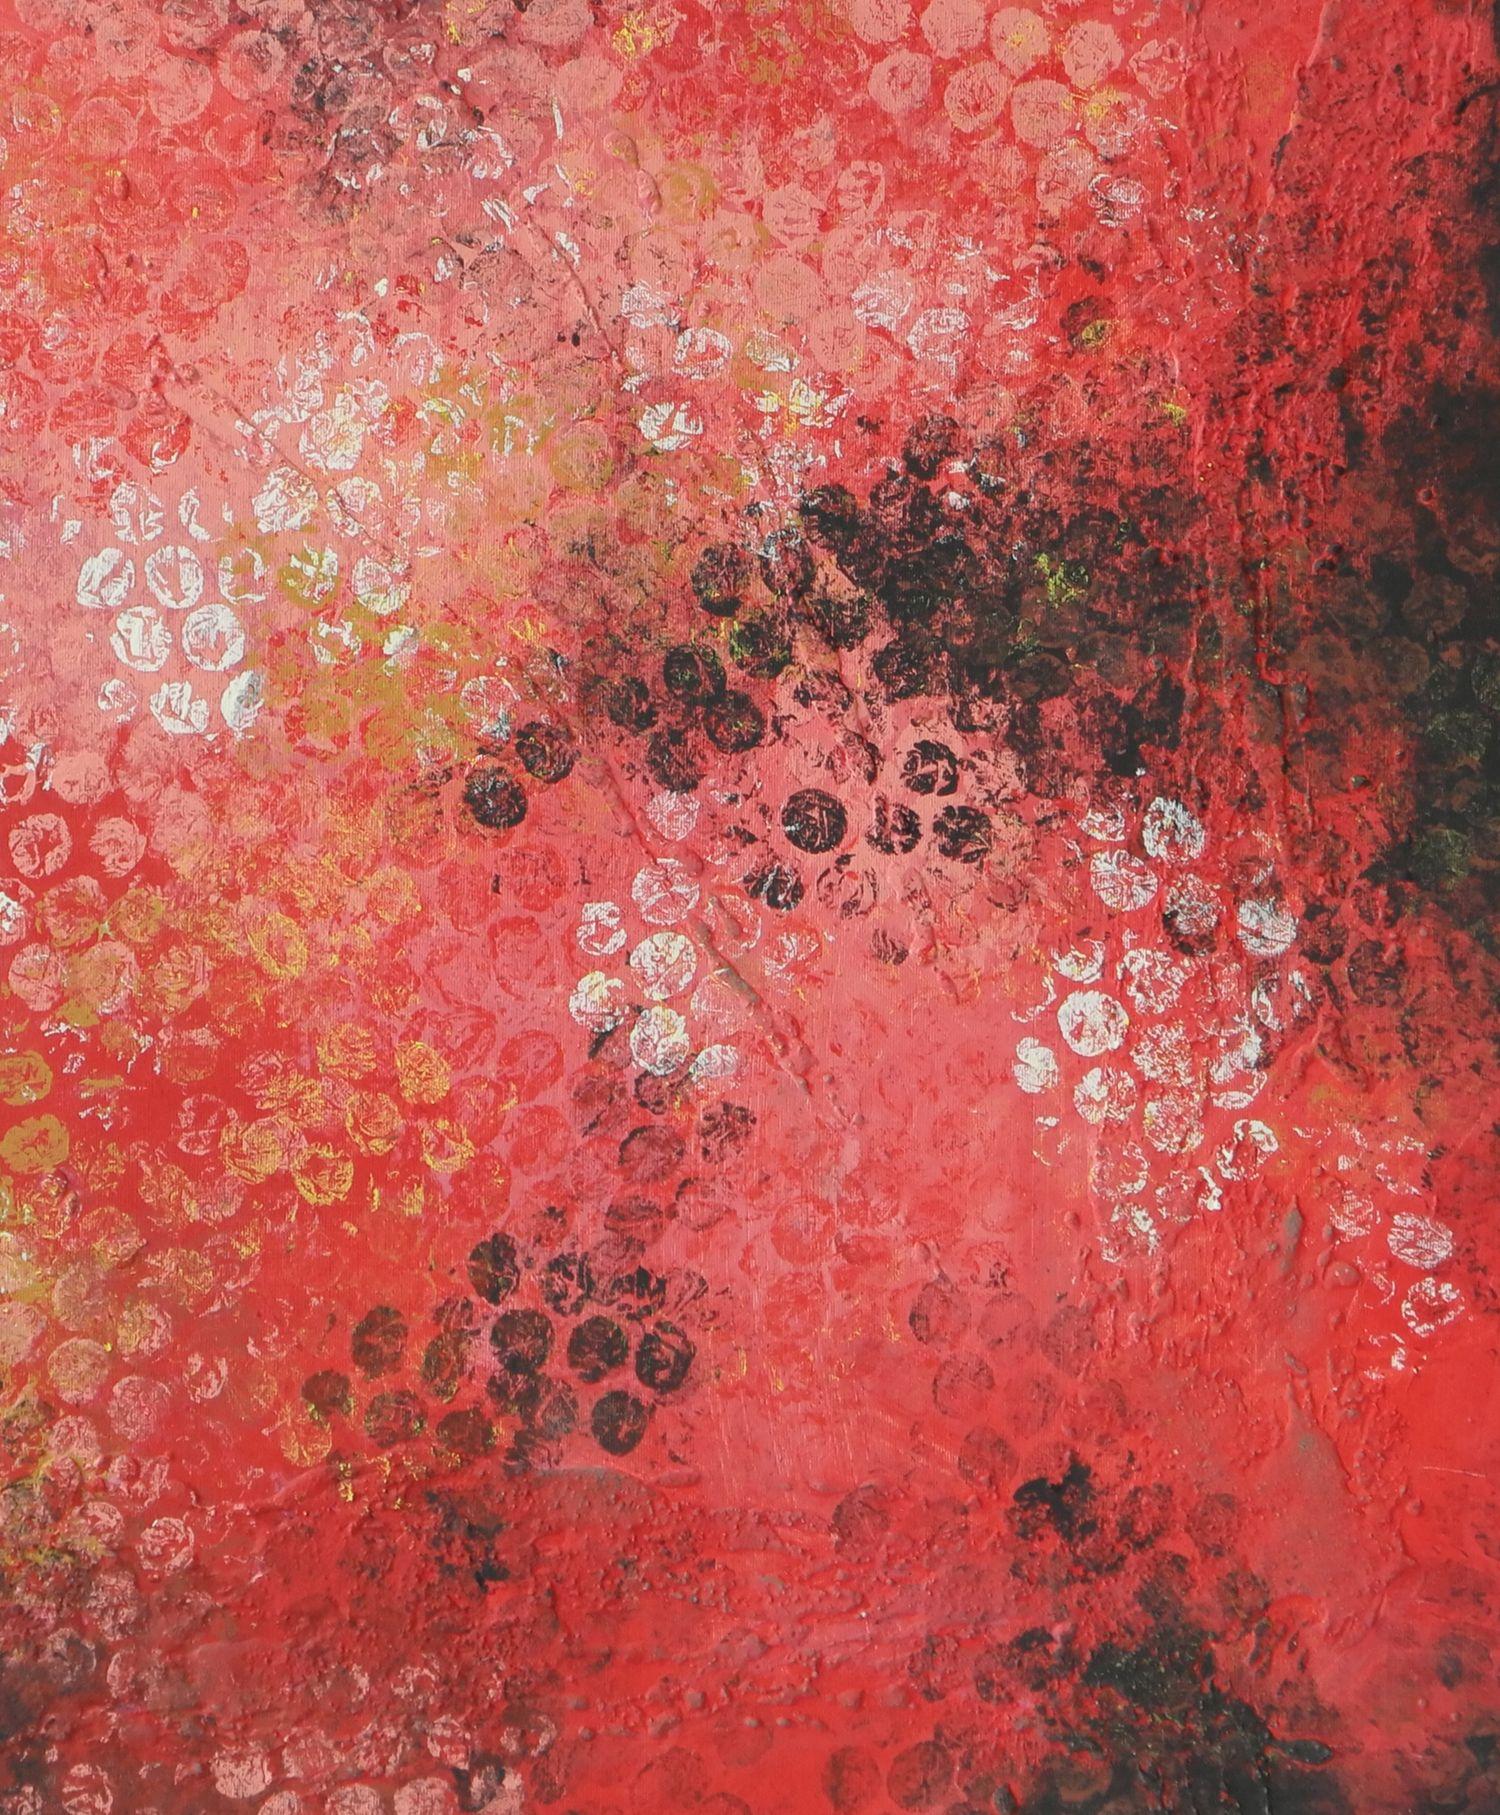 acrylic bubbles painting